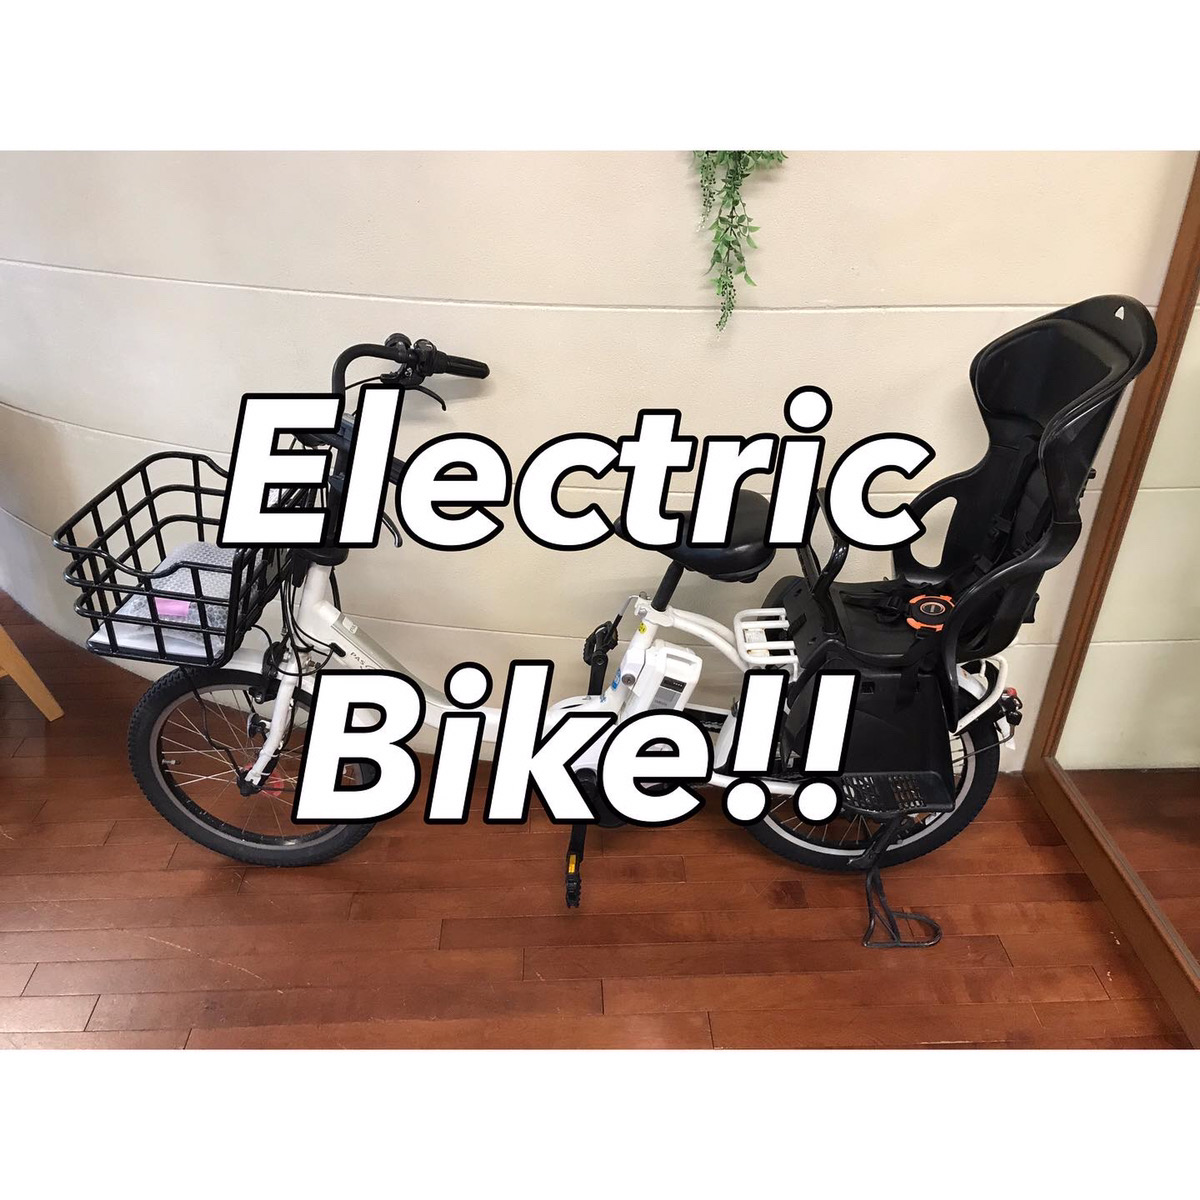 SOKO＋麻布店　電動アシスト付き自転車　商品入荷🎉Electric bike available✨